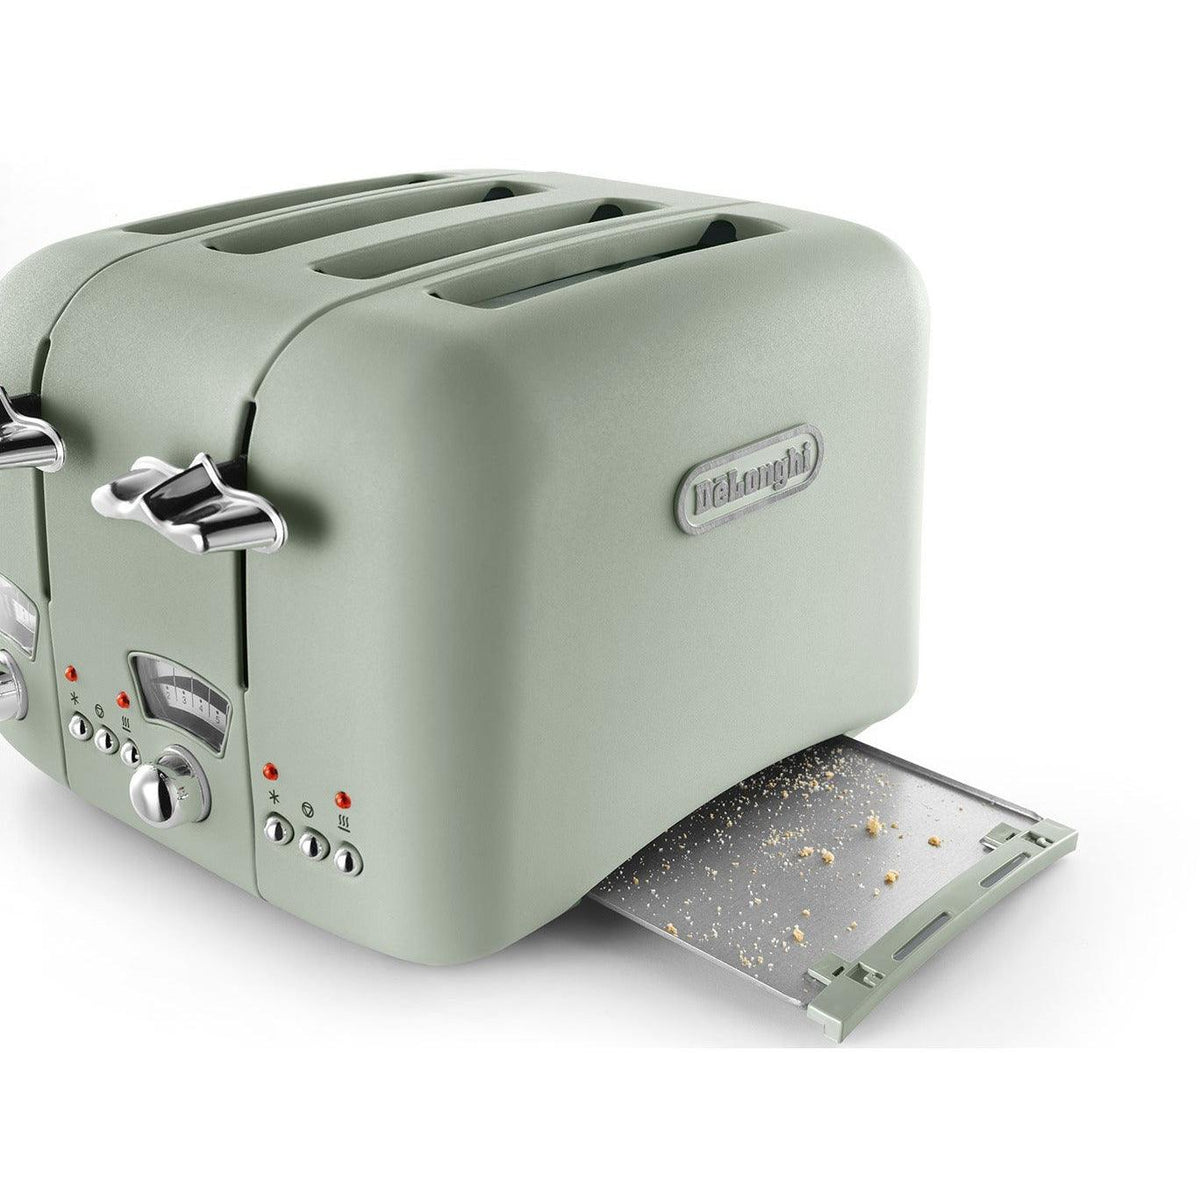 DeLonghi Argento Flora 1800W 4 Slice Toaster - Green | CT04.GR from DID Electrical - guaranteed Irish, guaranteed quality service. (6890772496572)